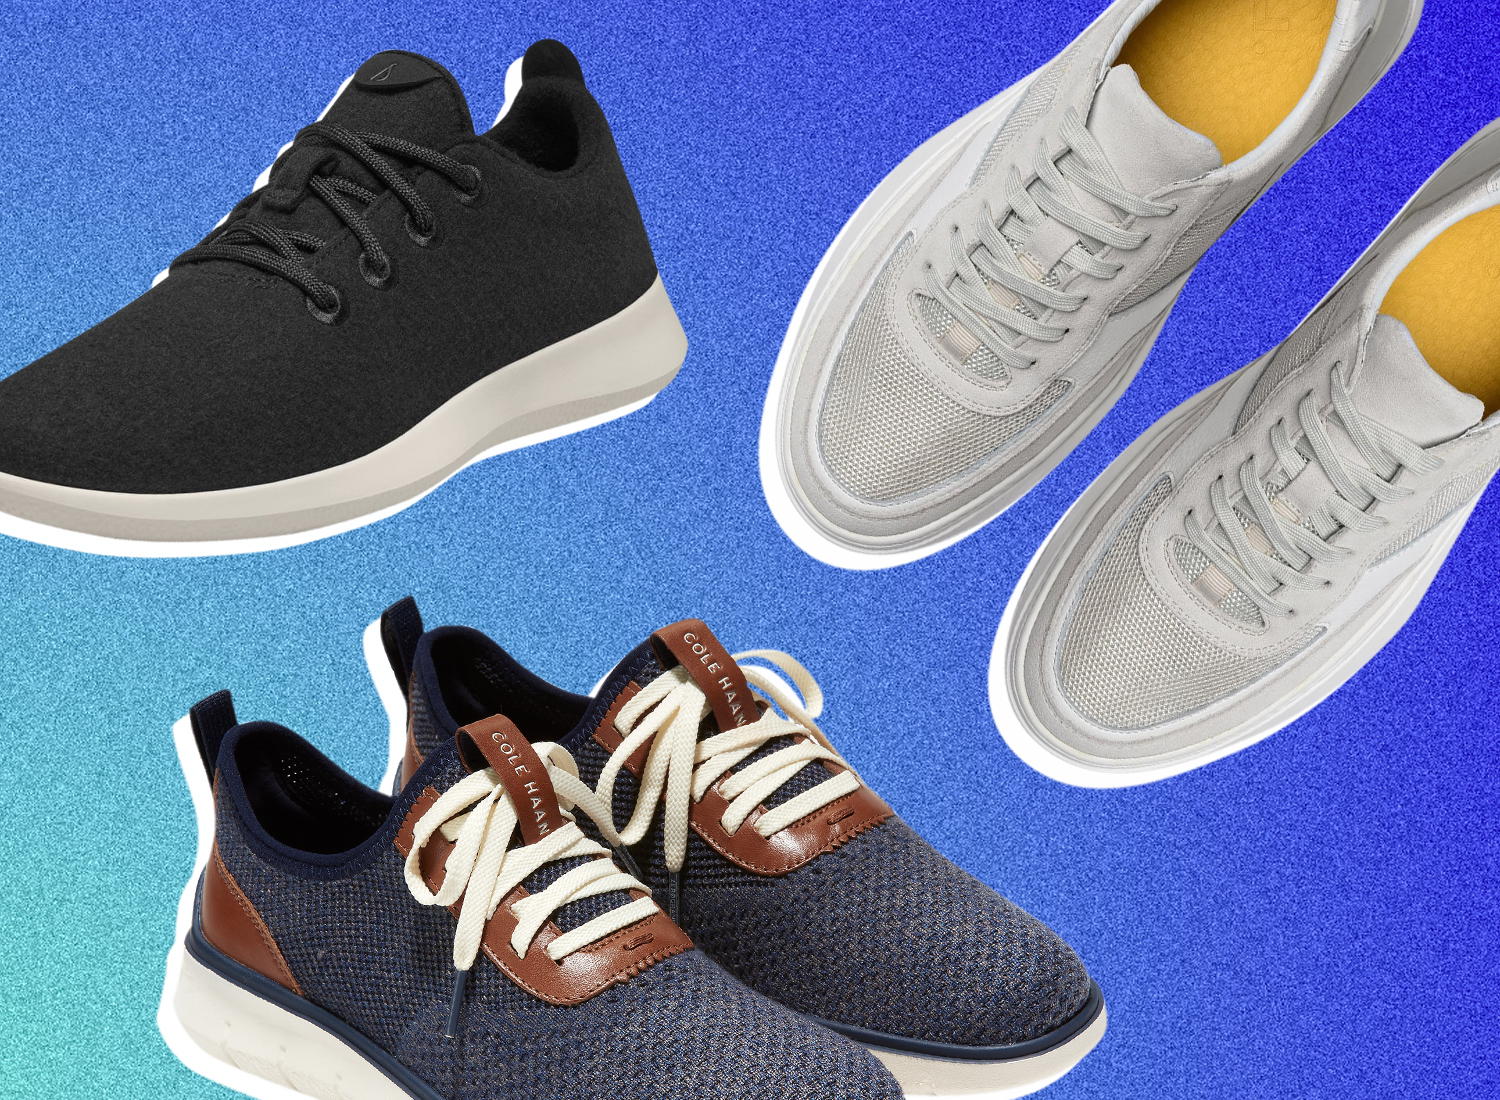 13 Most Comfortable Men’s Sneakers For Endless Walking